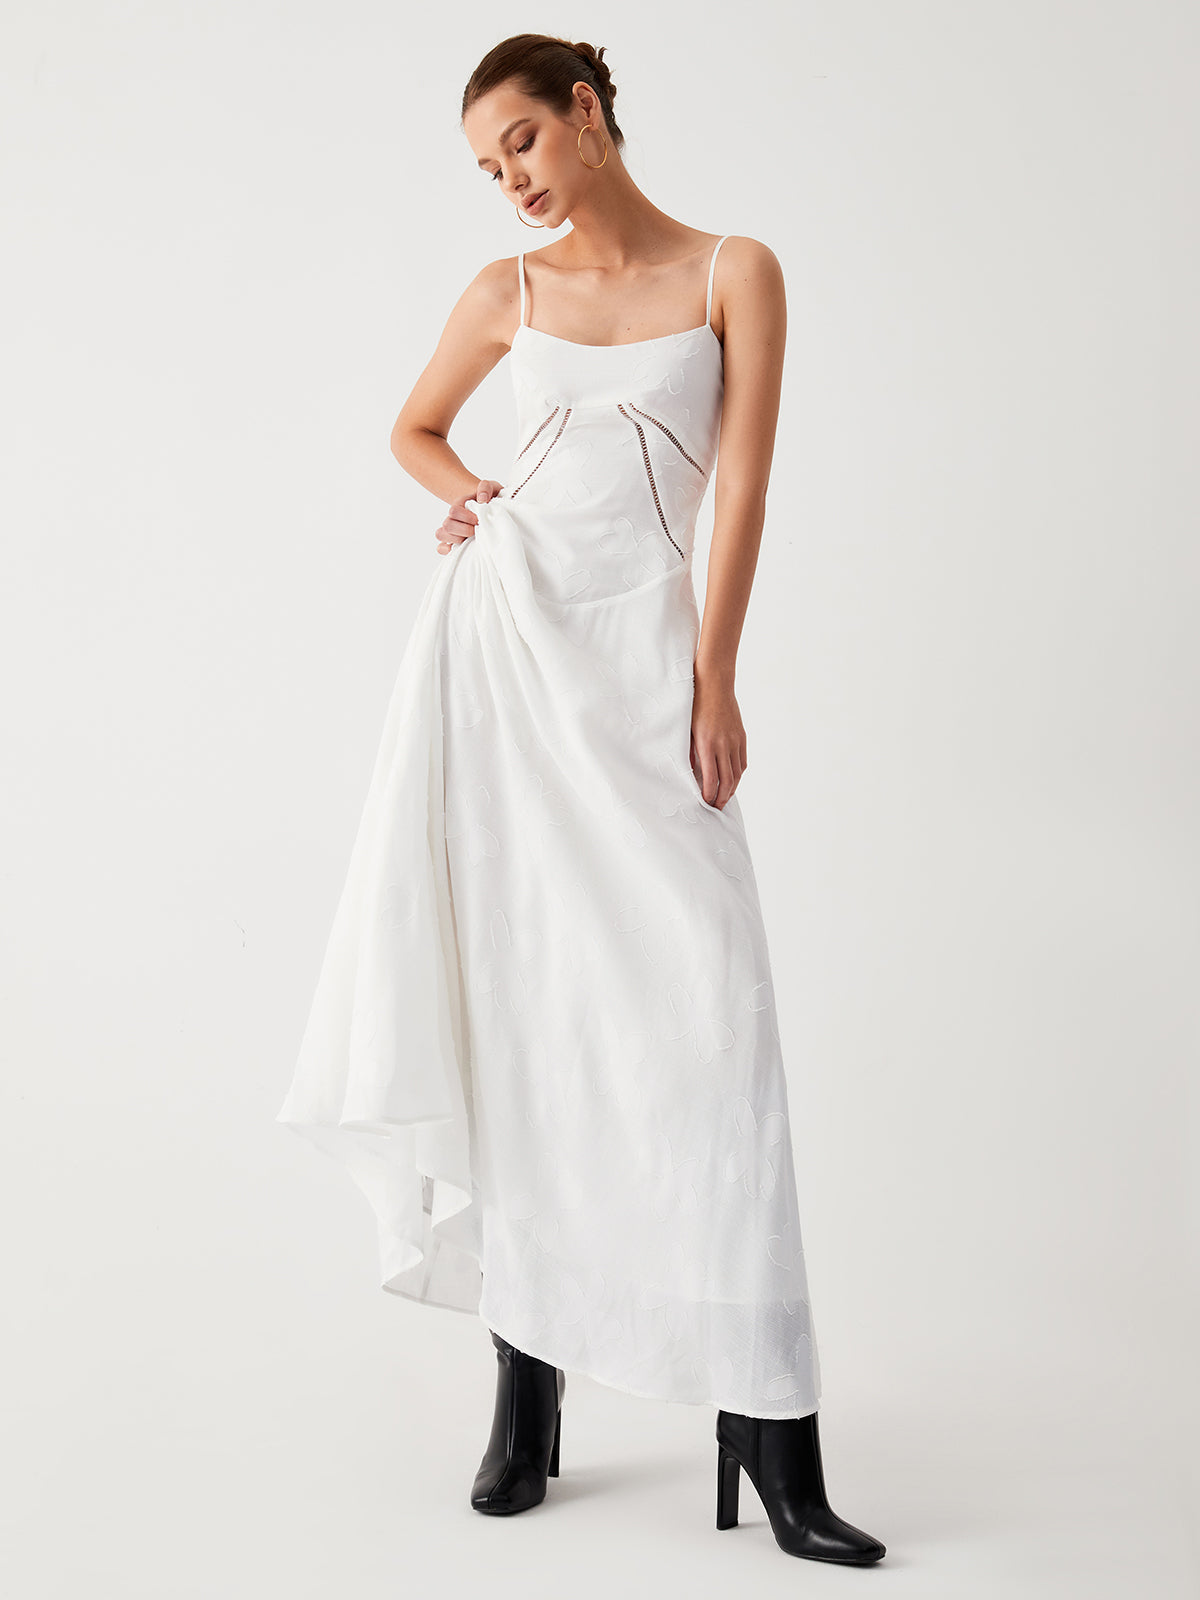 Embroidered Gardenia Tie Back Long Dress